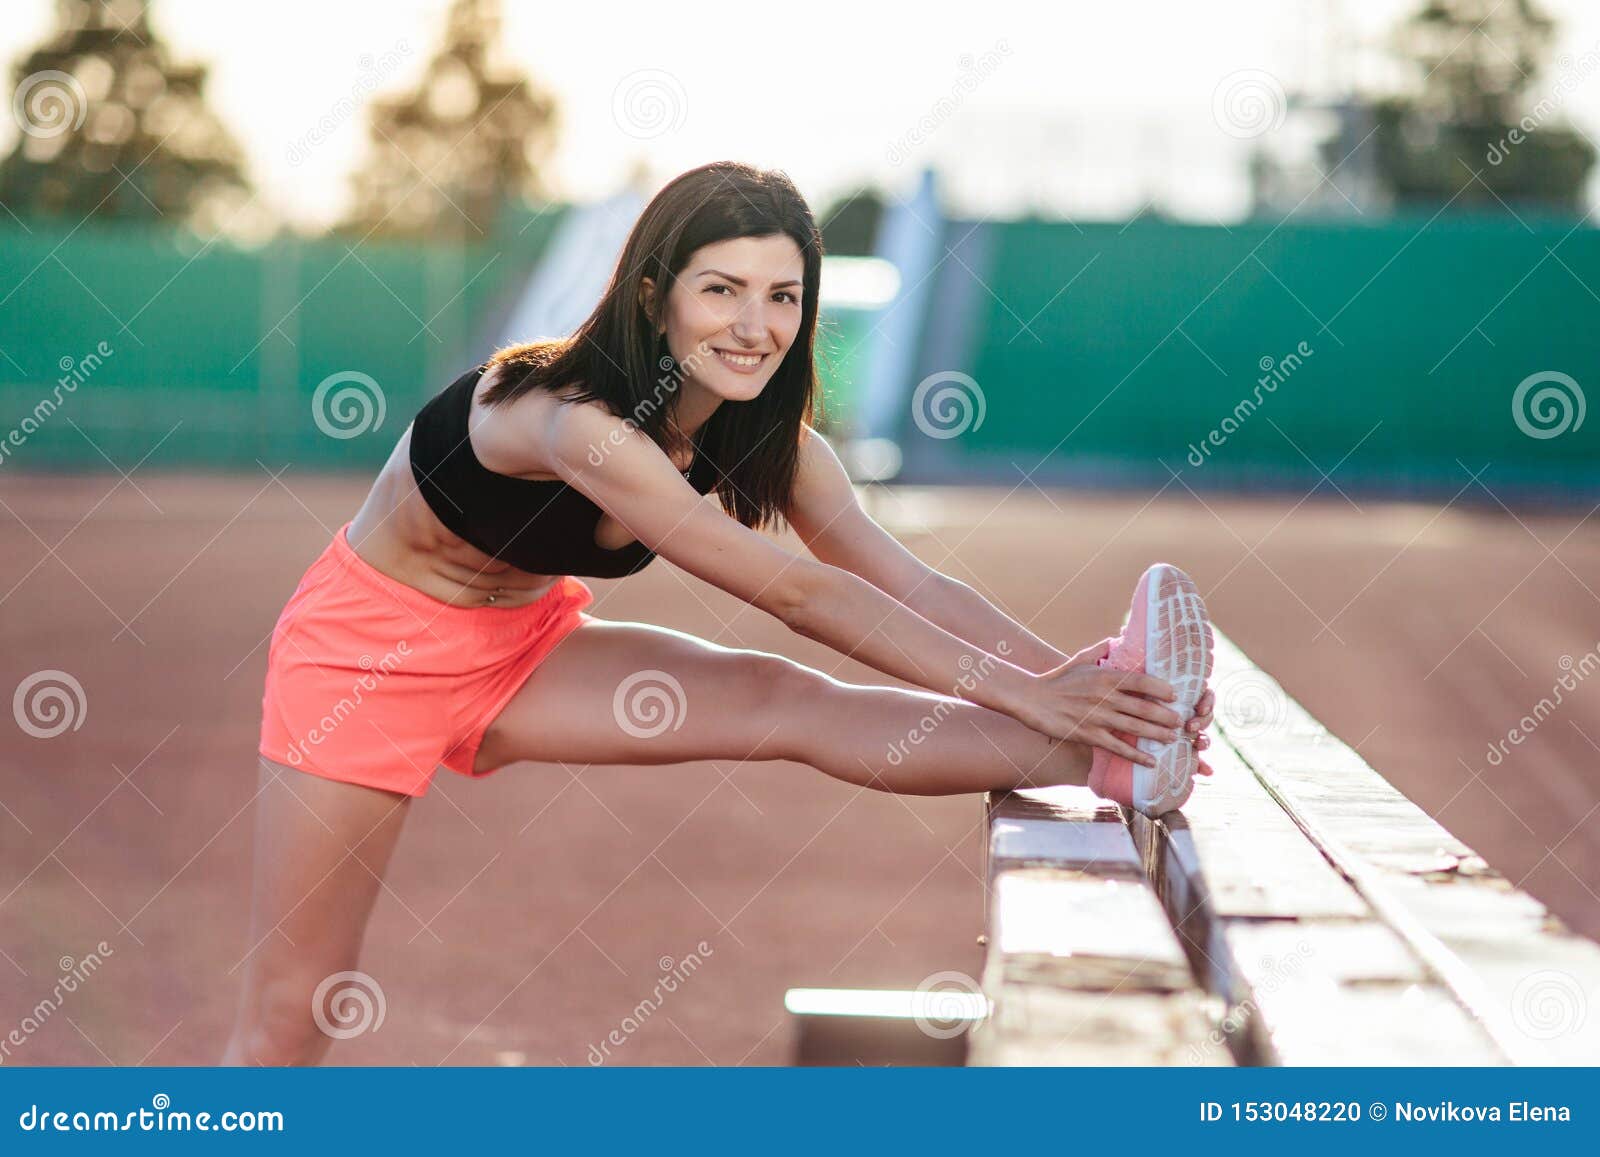 Beautiful Brunette Runner Woman Doing Stretching Leaning Her Leg On